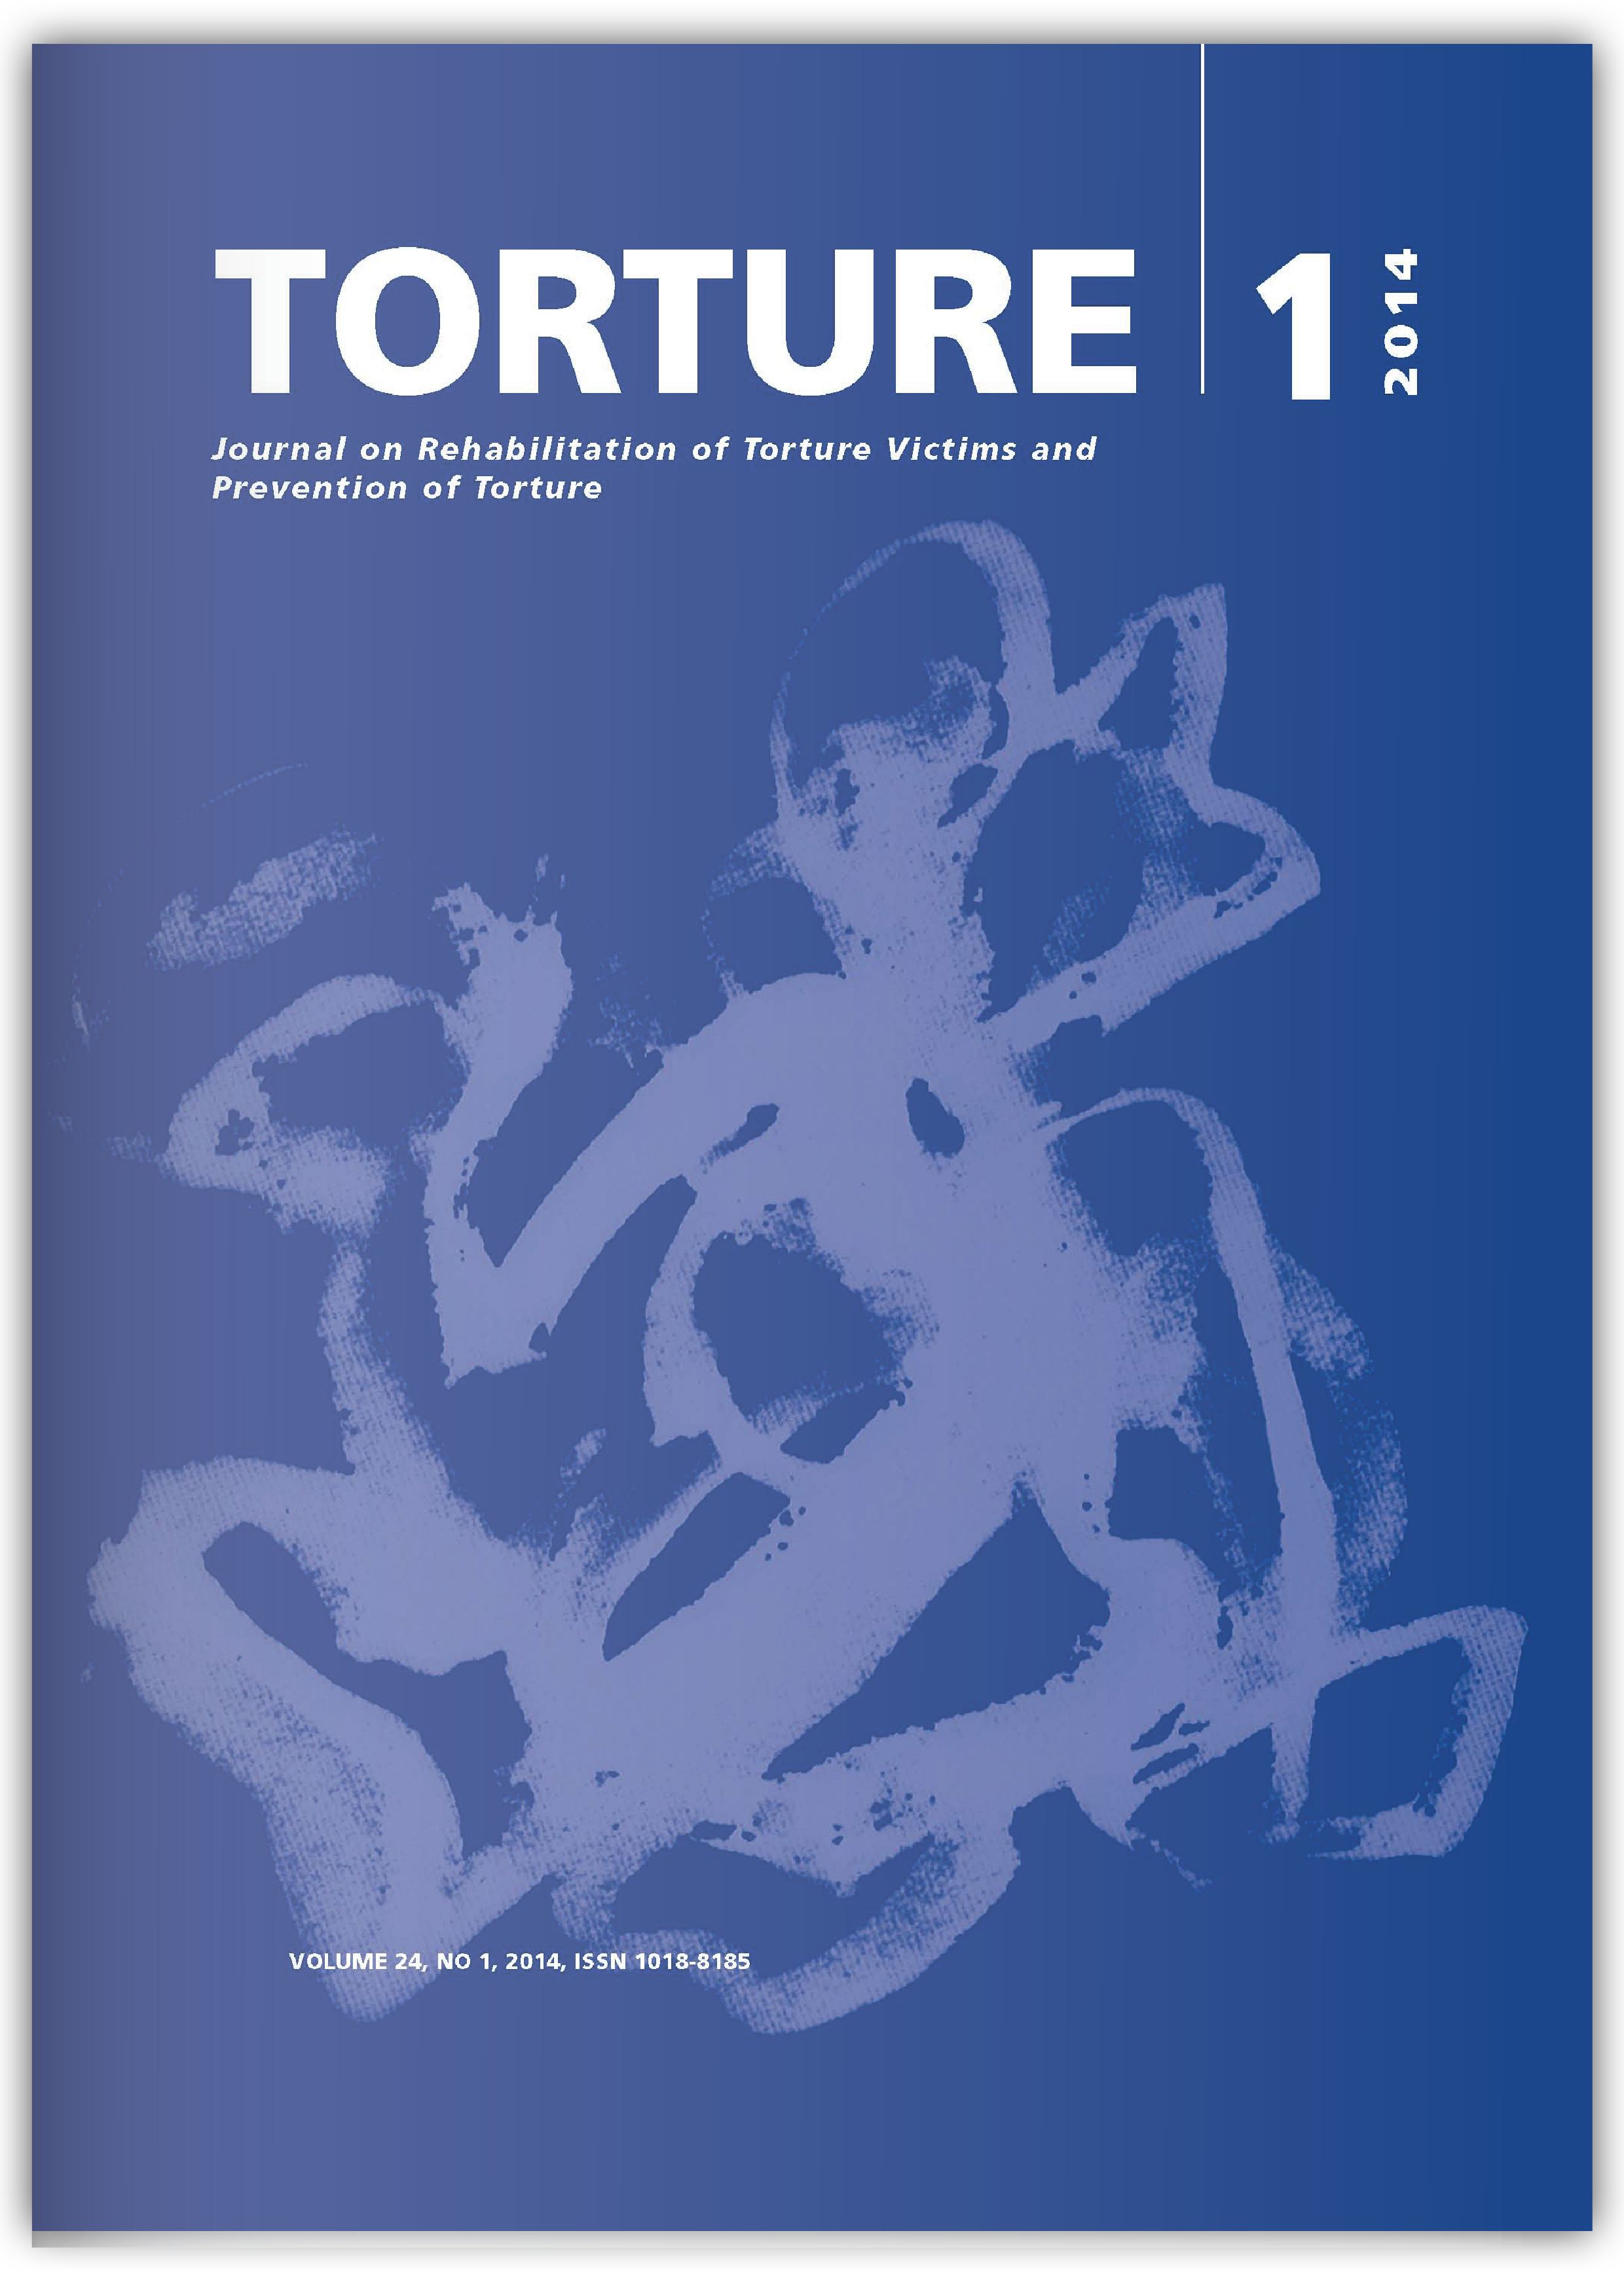 					View Vol. 24 No. 1 (2014): Torture Journal: Journal on Rehabilitation of Torture Victims and Prevention of Torture
				